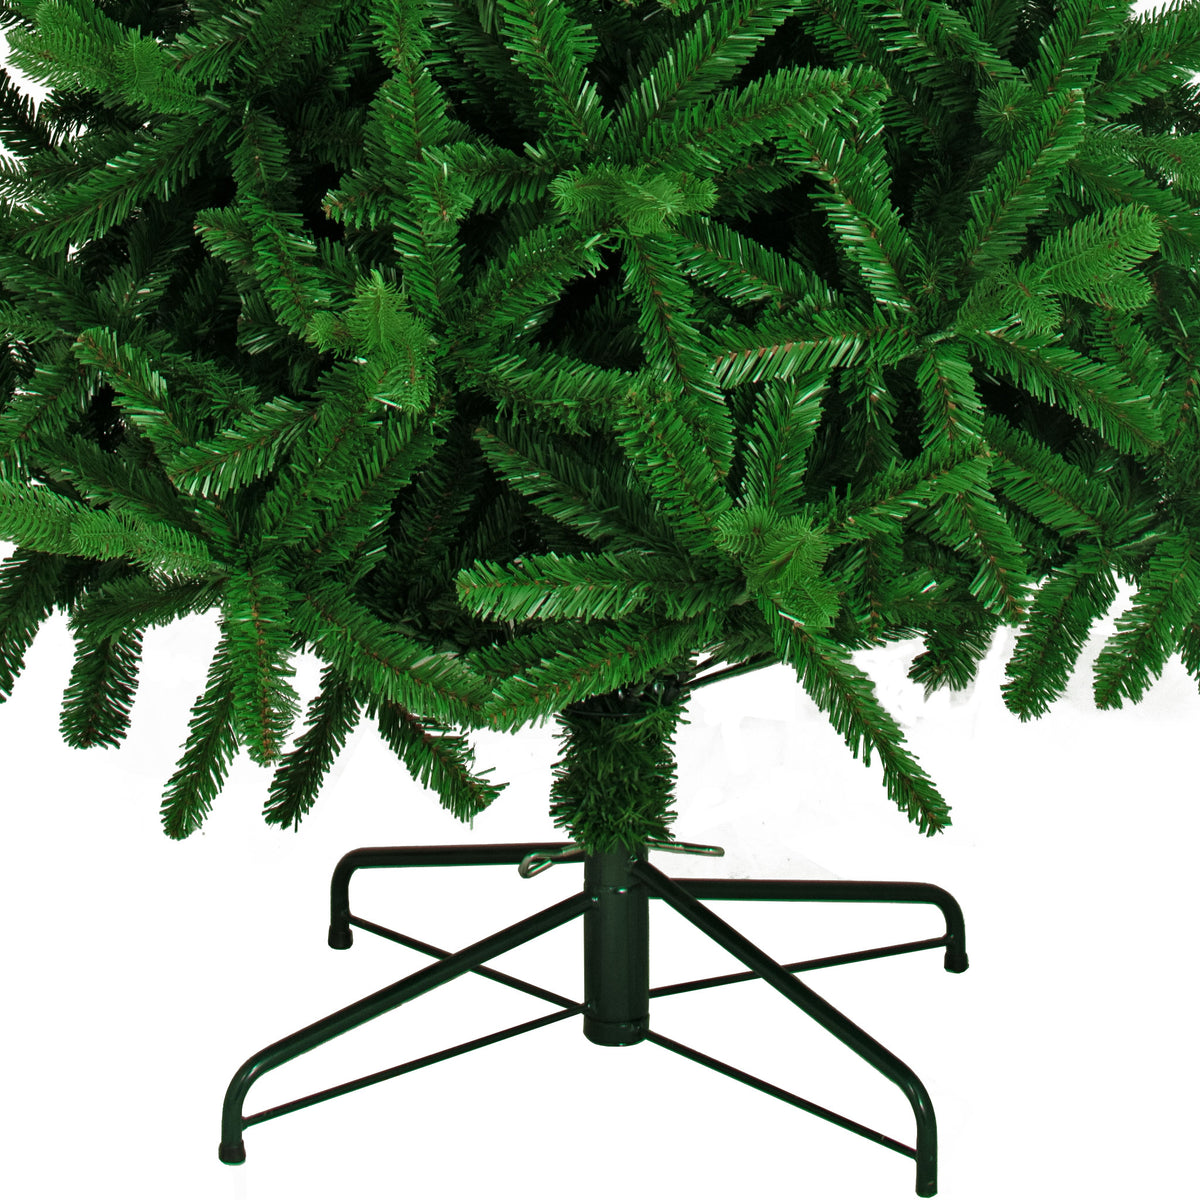 Features Folding Branches&nbsp;- Branches conveniently fold upward for effortless storage. These flexible branches can be easily styled in any direction, allowing you to create your own unique holiday display with ease.